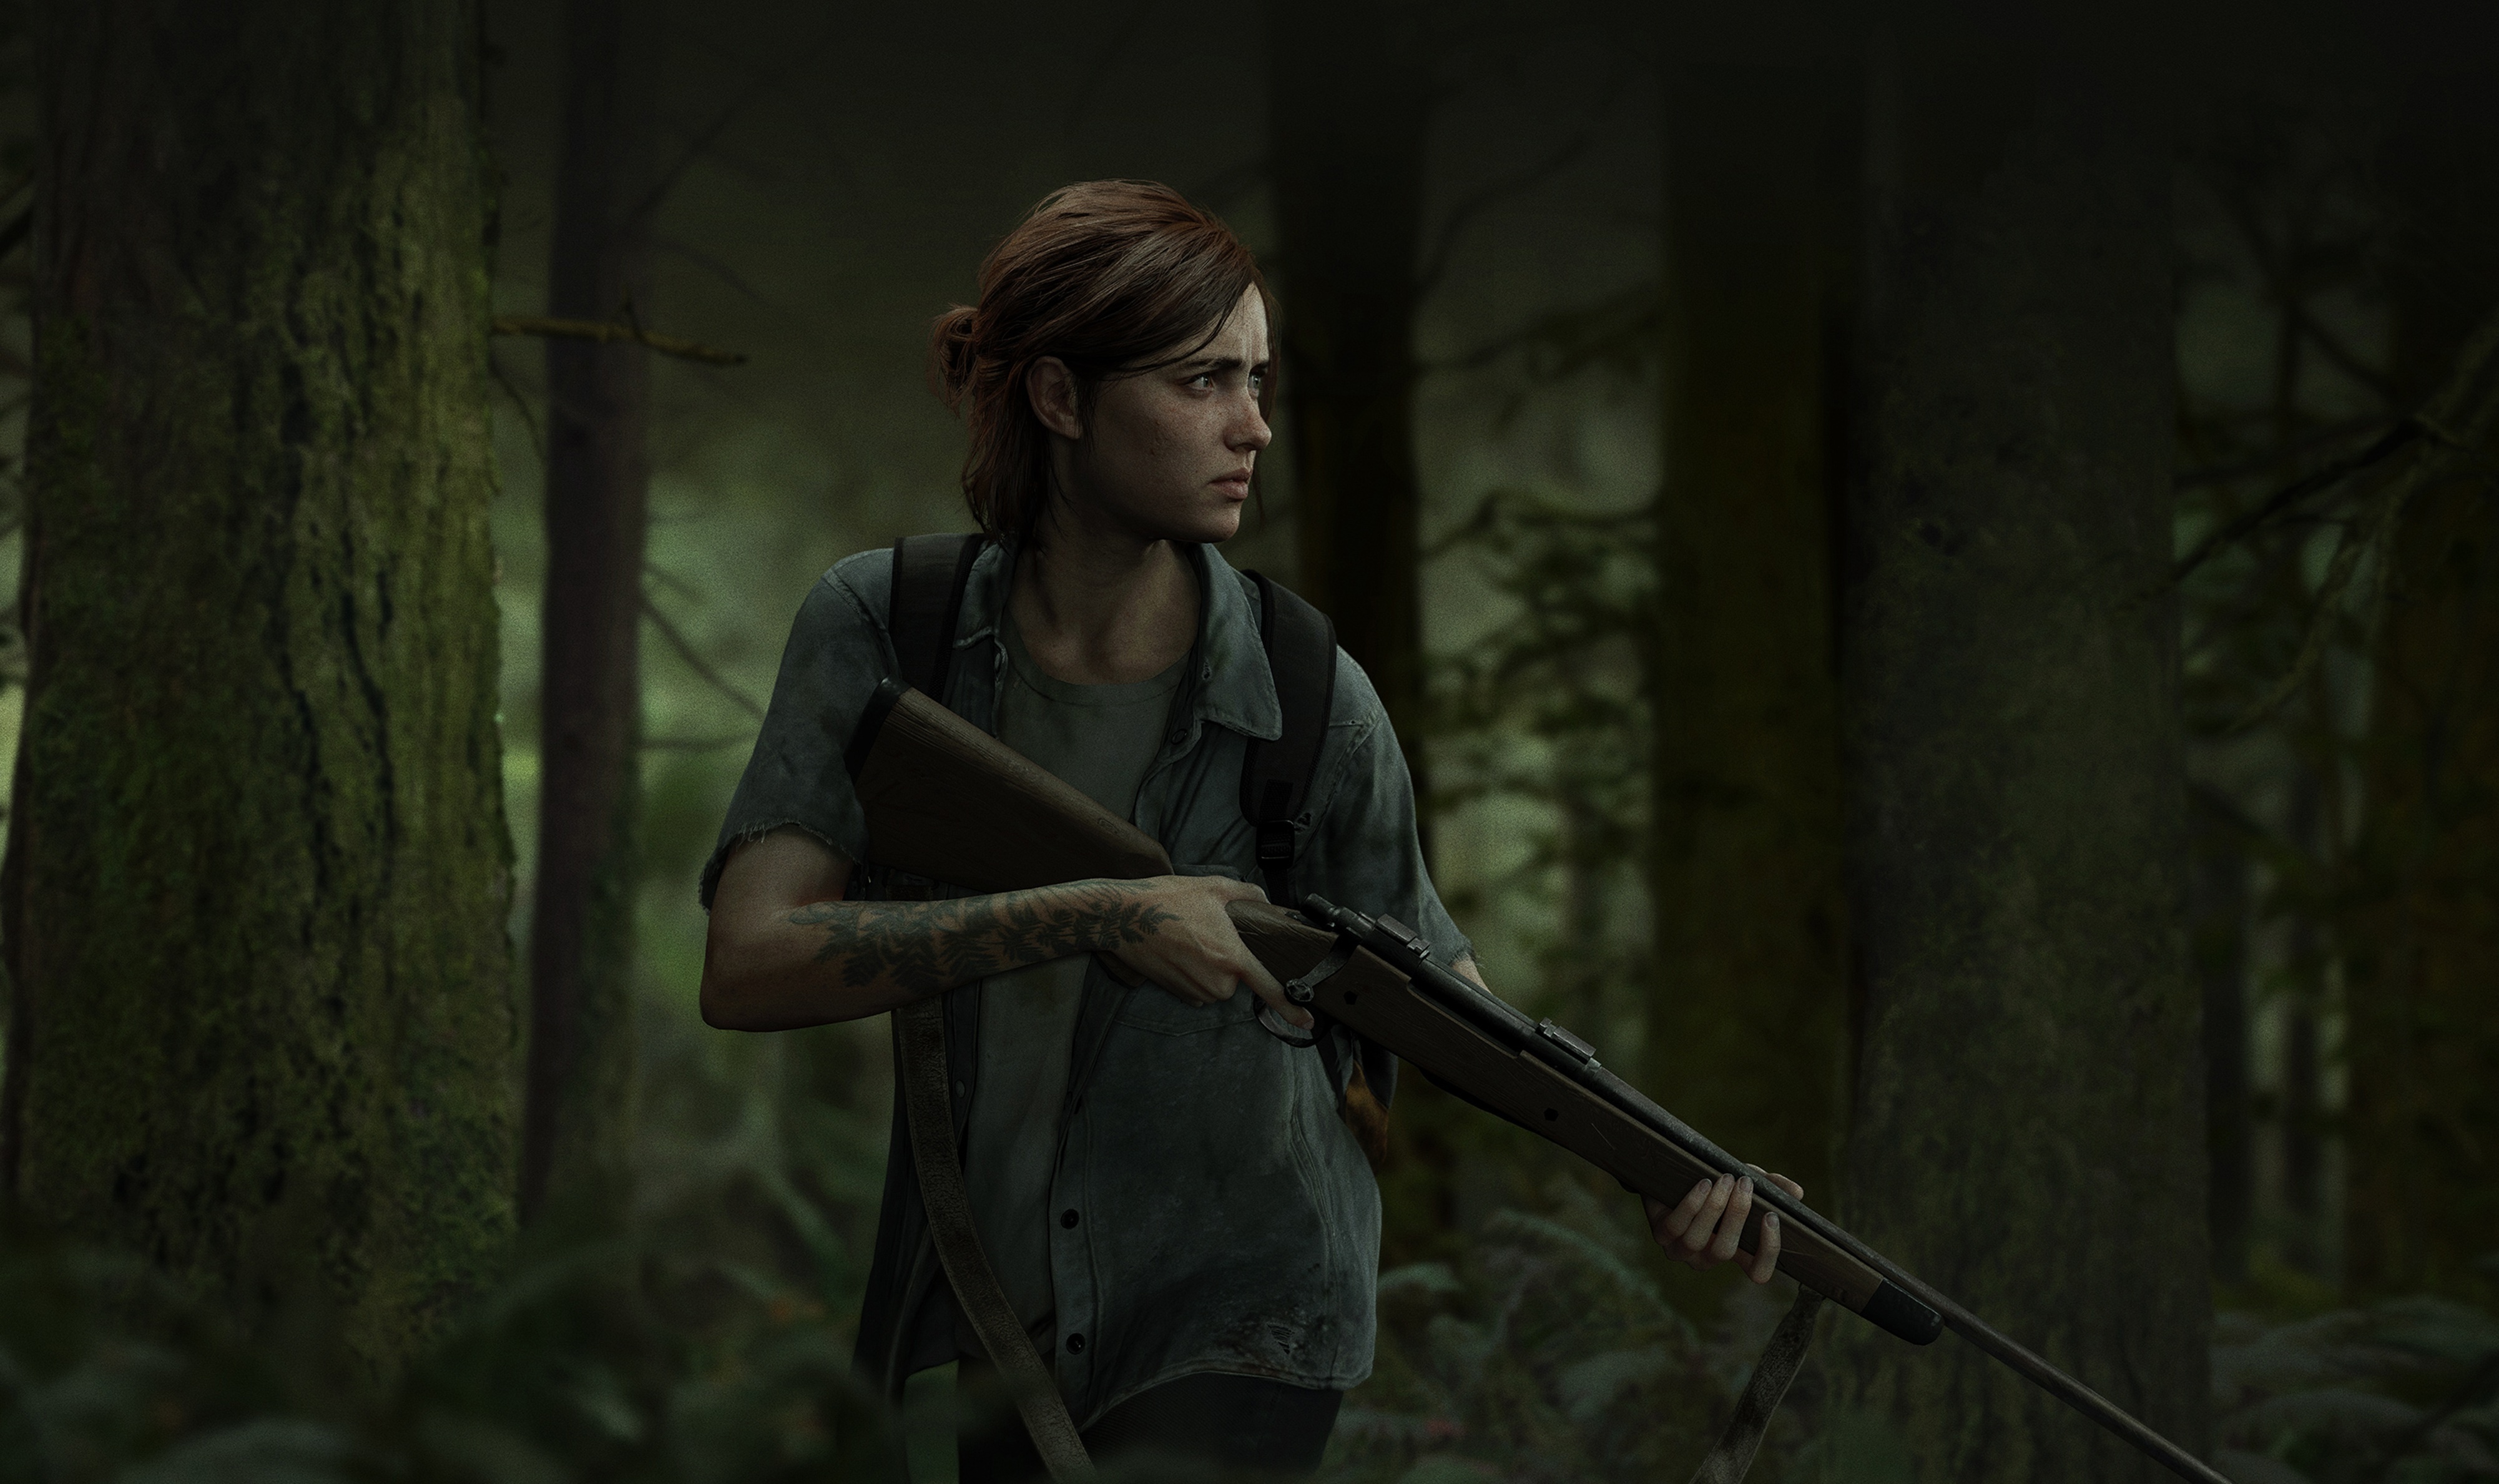 General 4003x2377 gun video games forest tattoo apocalyptic rifles The Last of Us 2 Ellie Williams video game girls video game characters inked girls Naughty Dog Sony Computer Entertainment girls with guns weapon